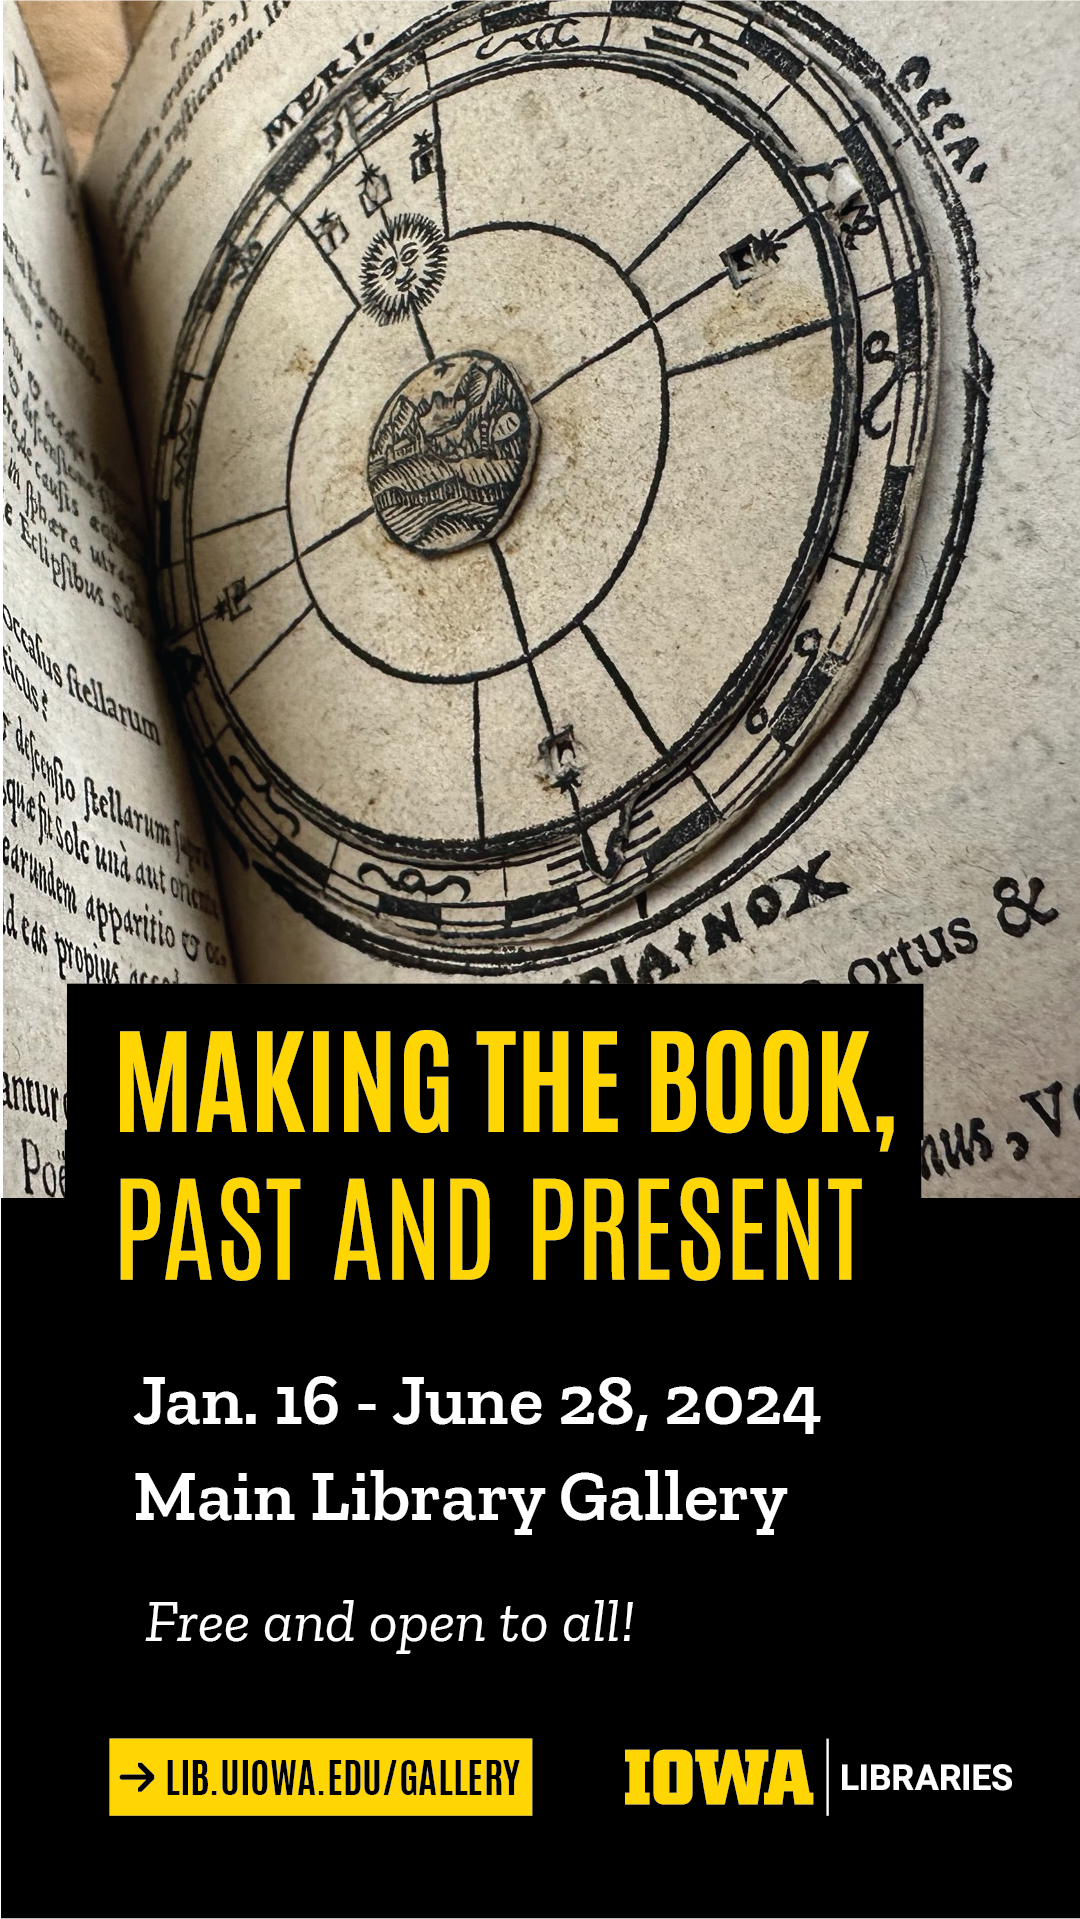 Making the Book, Past and Present event title